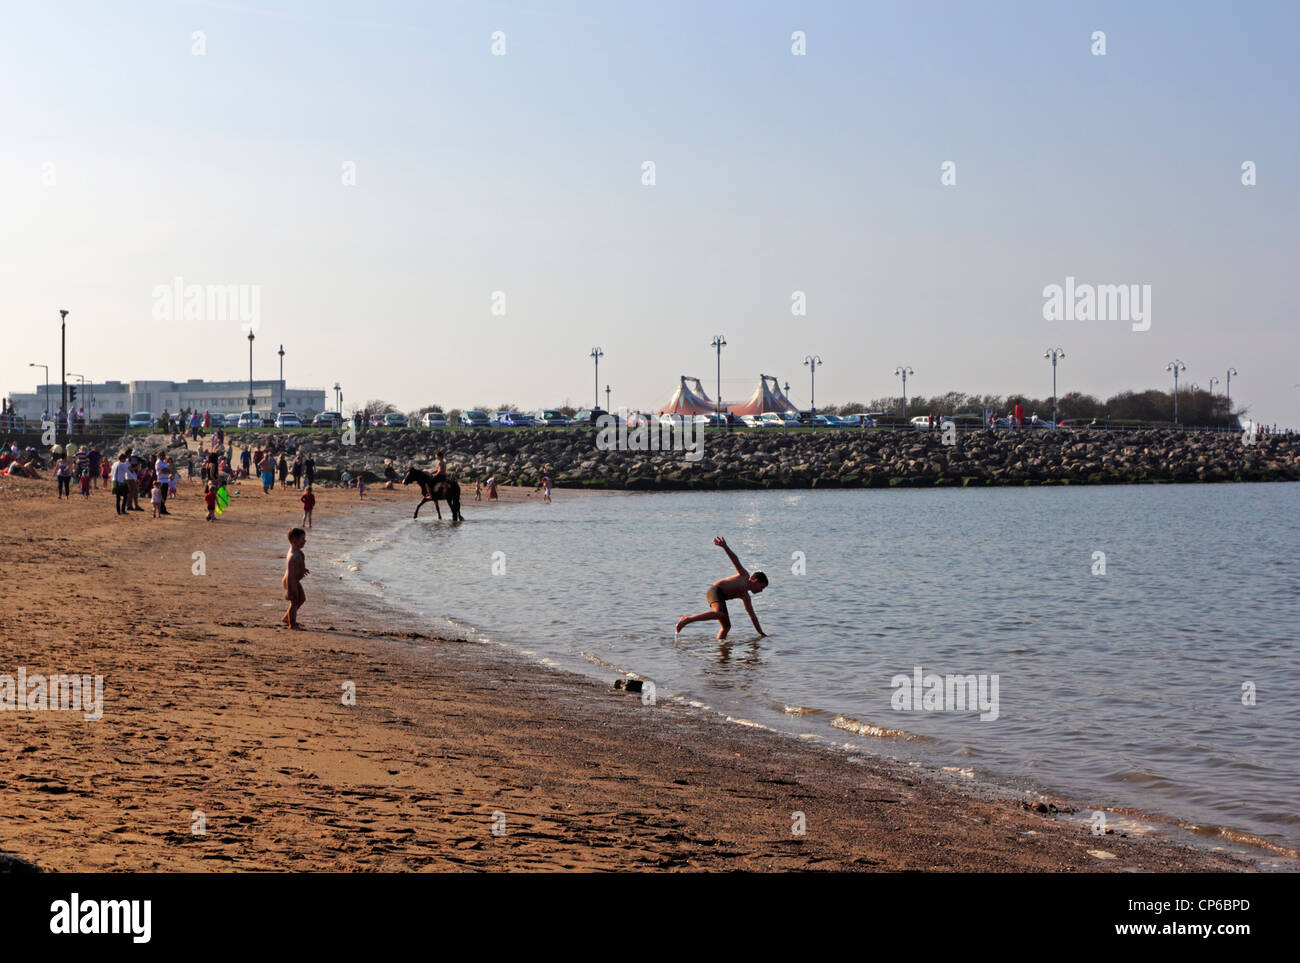 Children playing on the beach at Morecambe, Lancashire. Stock Photo